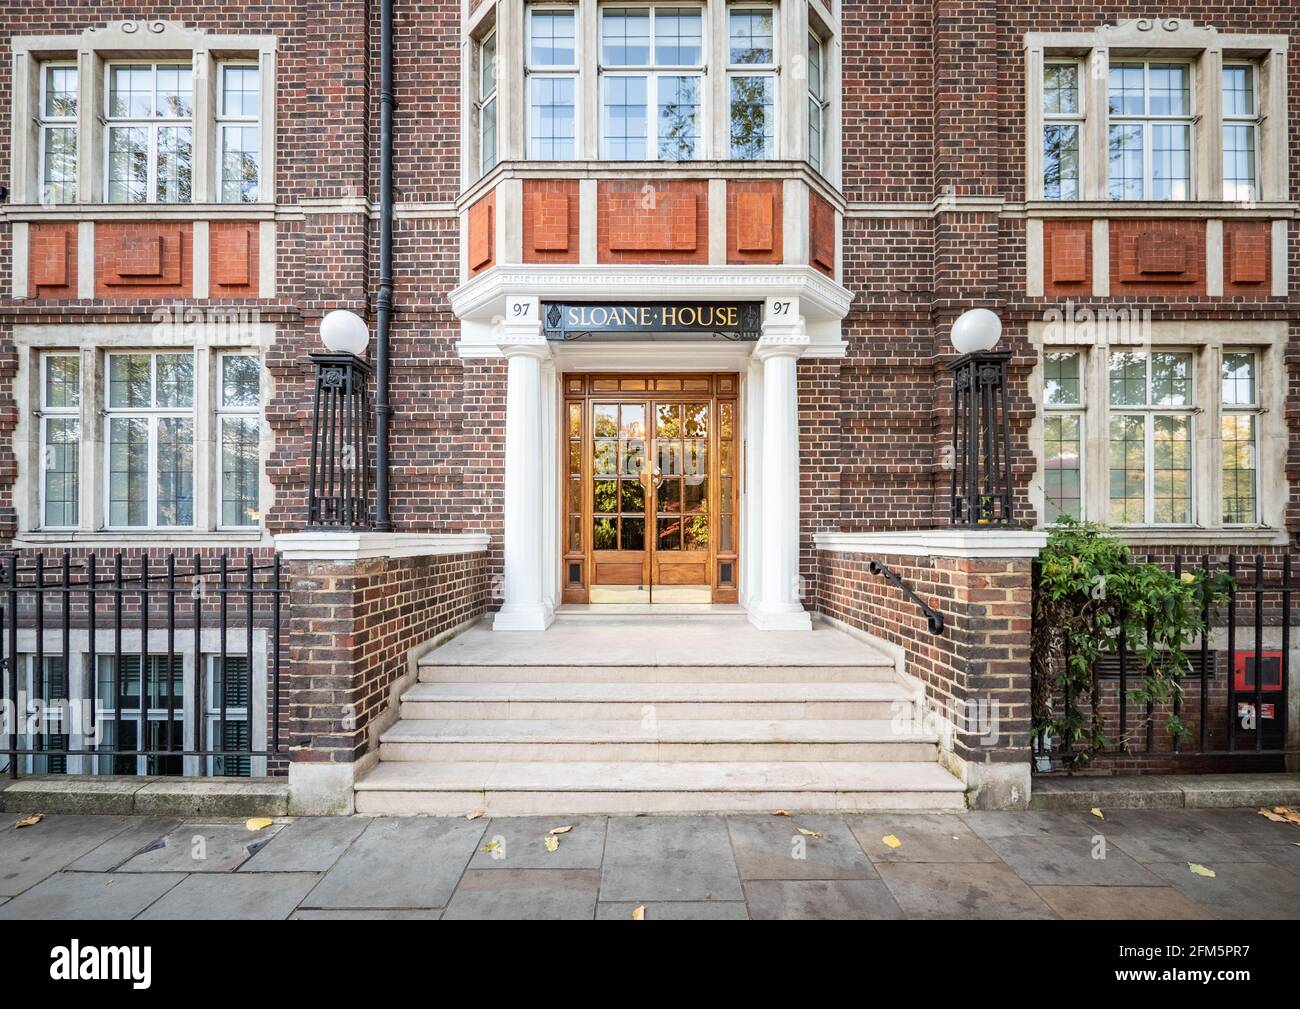 Sloane House, London. Traditional British 1930's Art Deco antrance and façade architecture to a West London apartment mansion block near Sloane Square Stock Photo